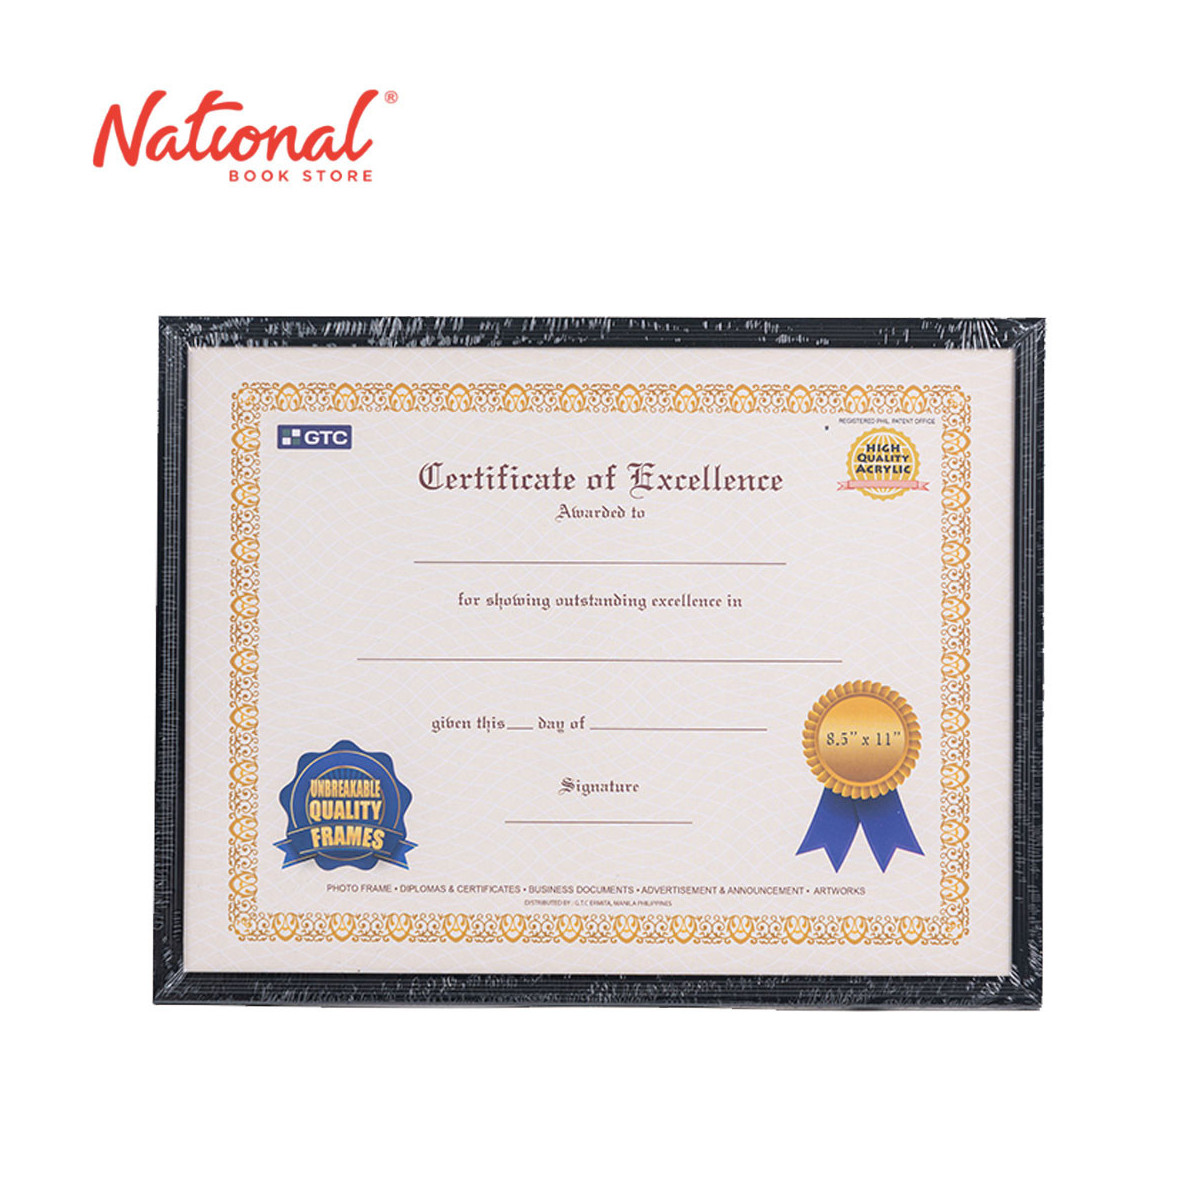 GTC Certificate Frame Sl811 8.5x11 inches PVC - Gifts - Frames